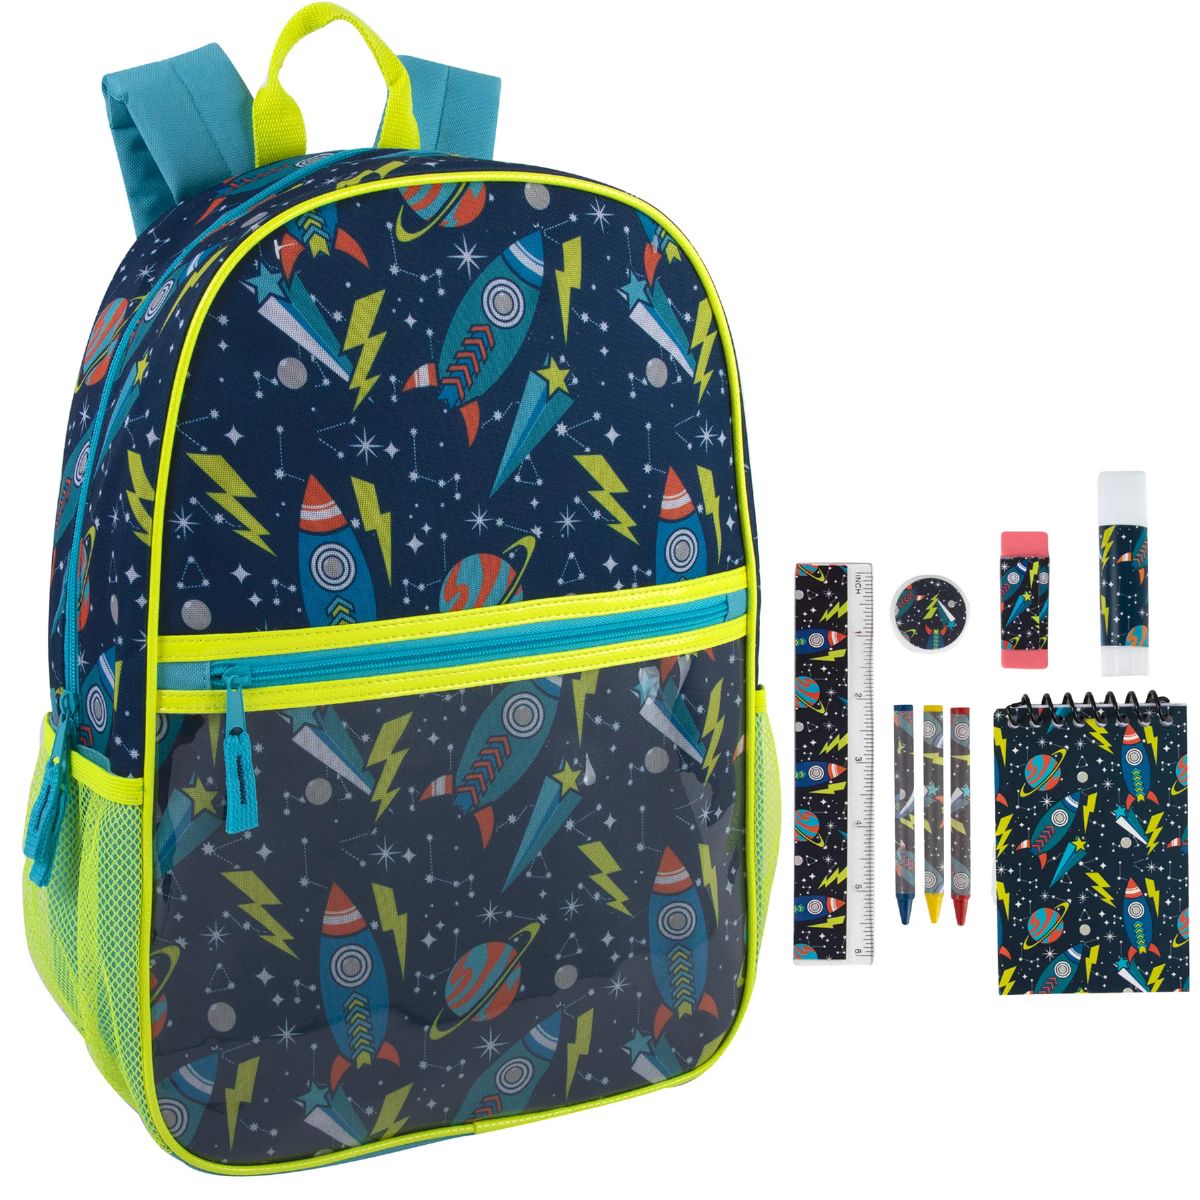 24 Pieces of 17" Outer Space Backpack With 9-Piece School Supply Kit